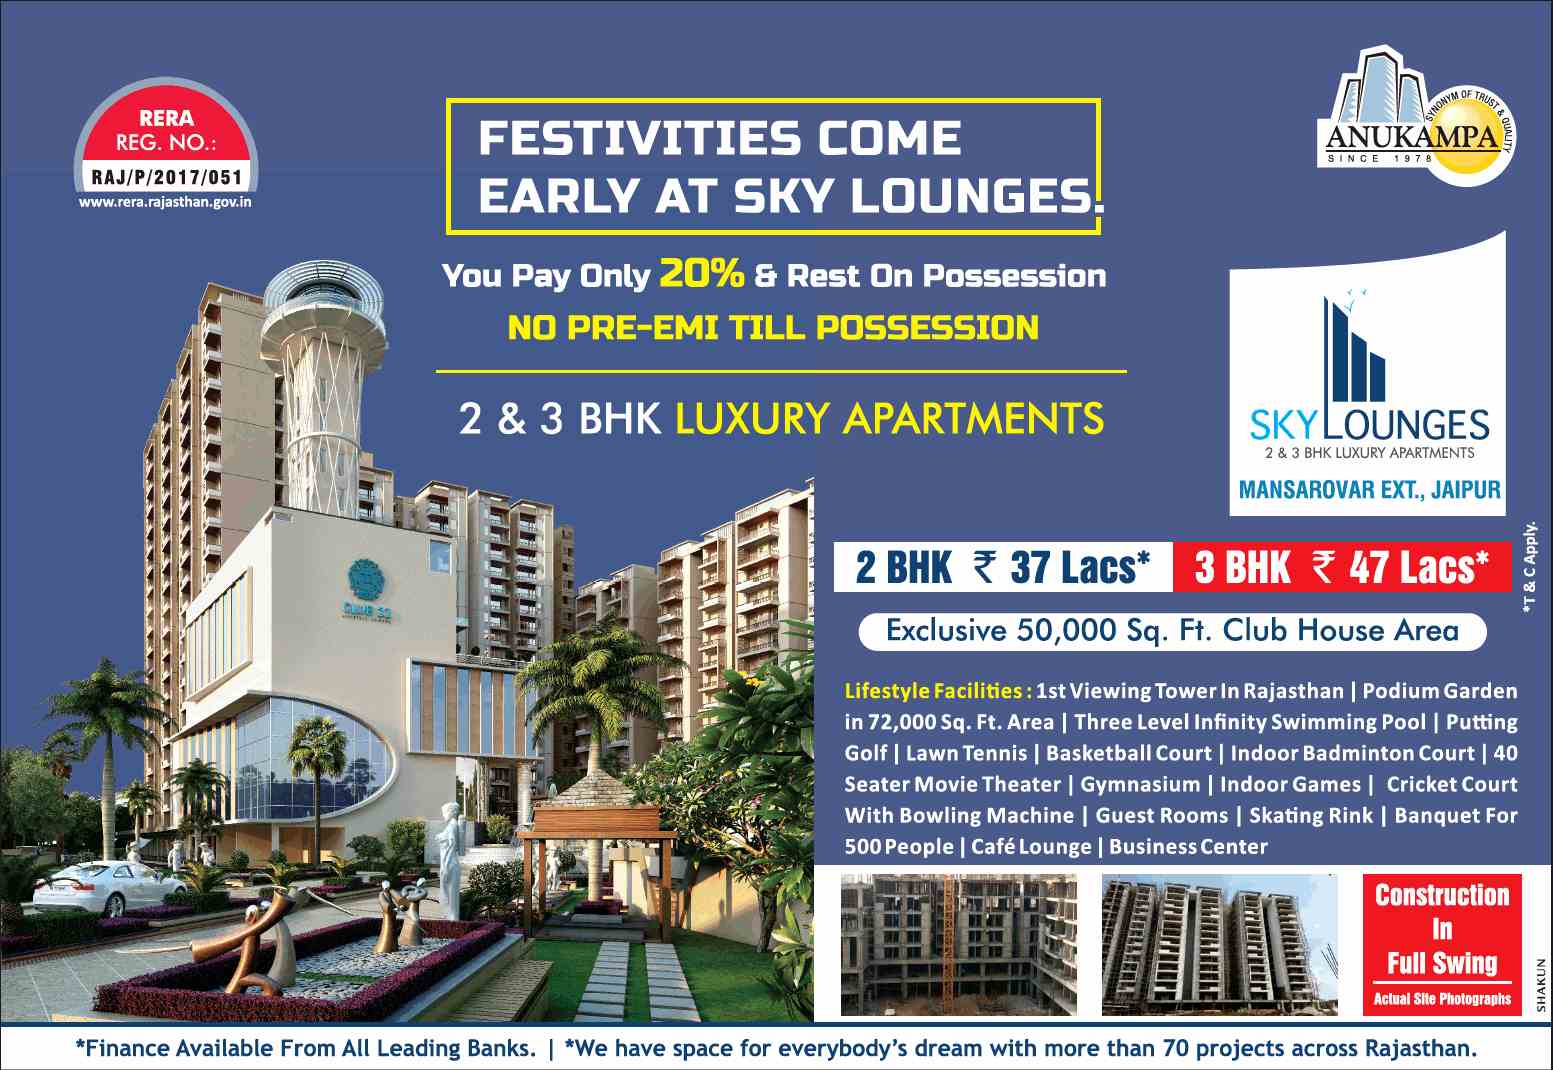 Construction in full swing at Anukampa Sky Lounges in Jaipur Update